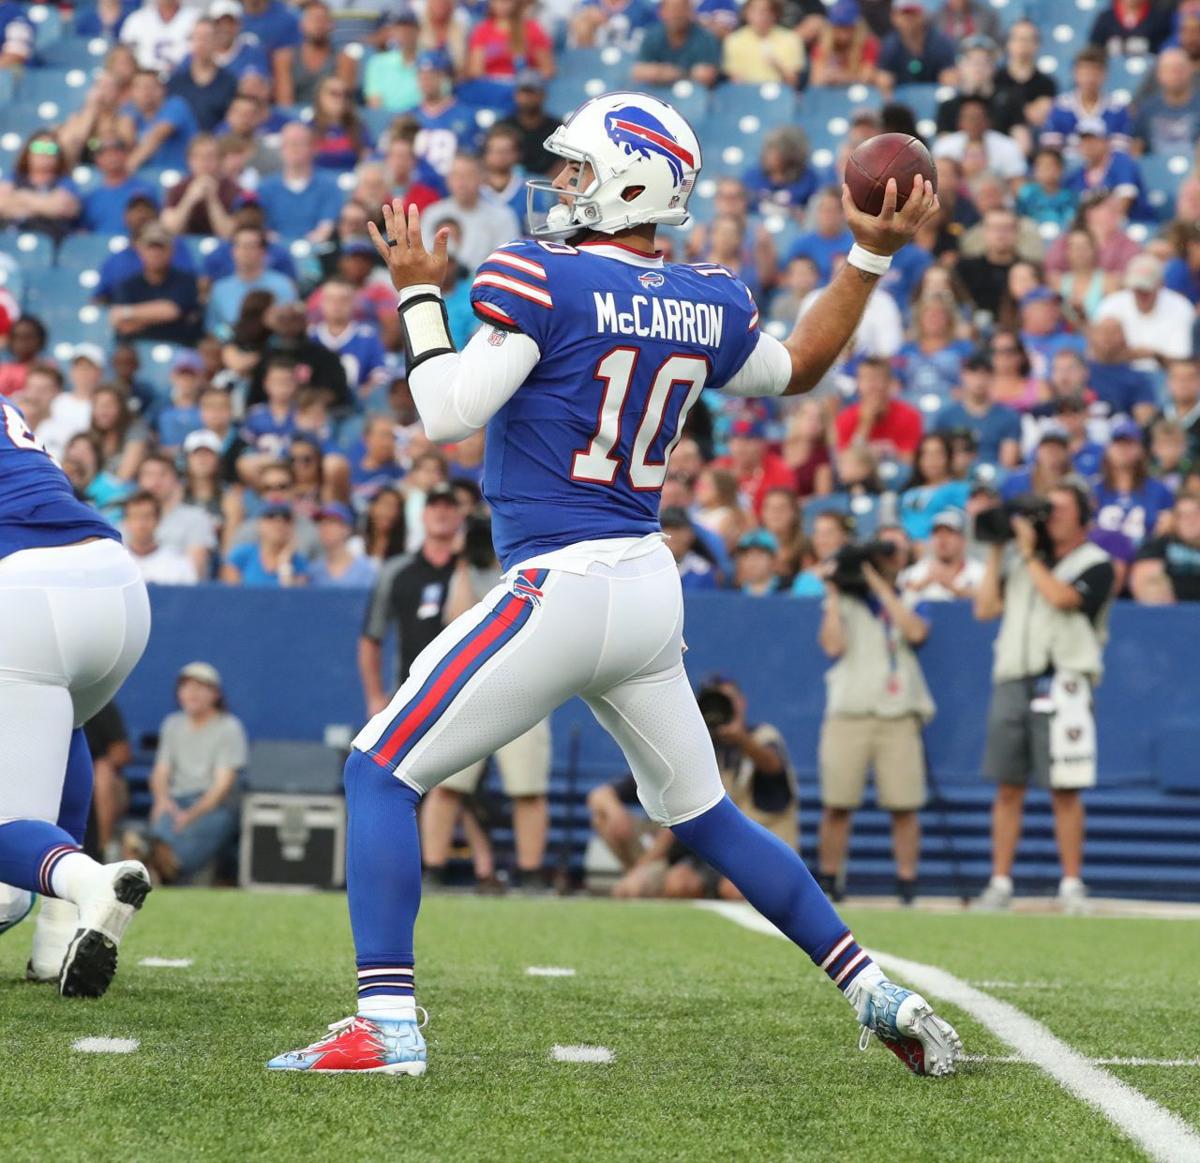 AJ McCarron on Bills' debut: 'I just go and play my game'